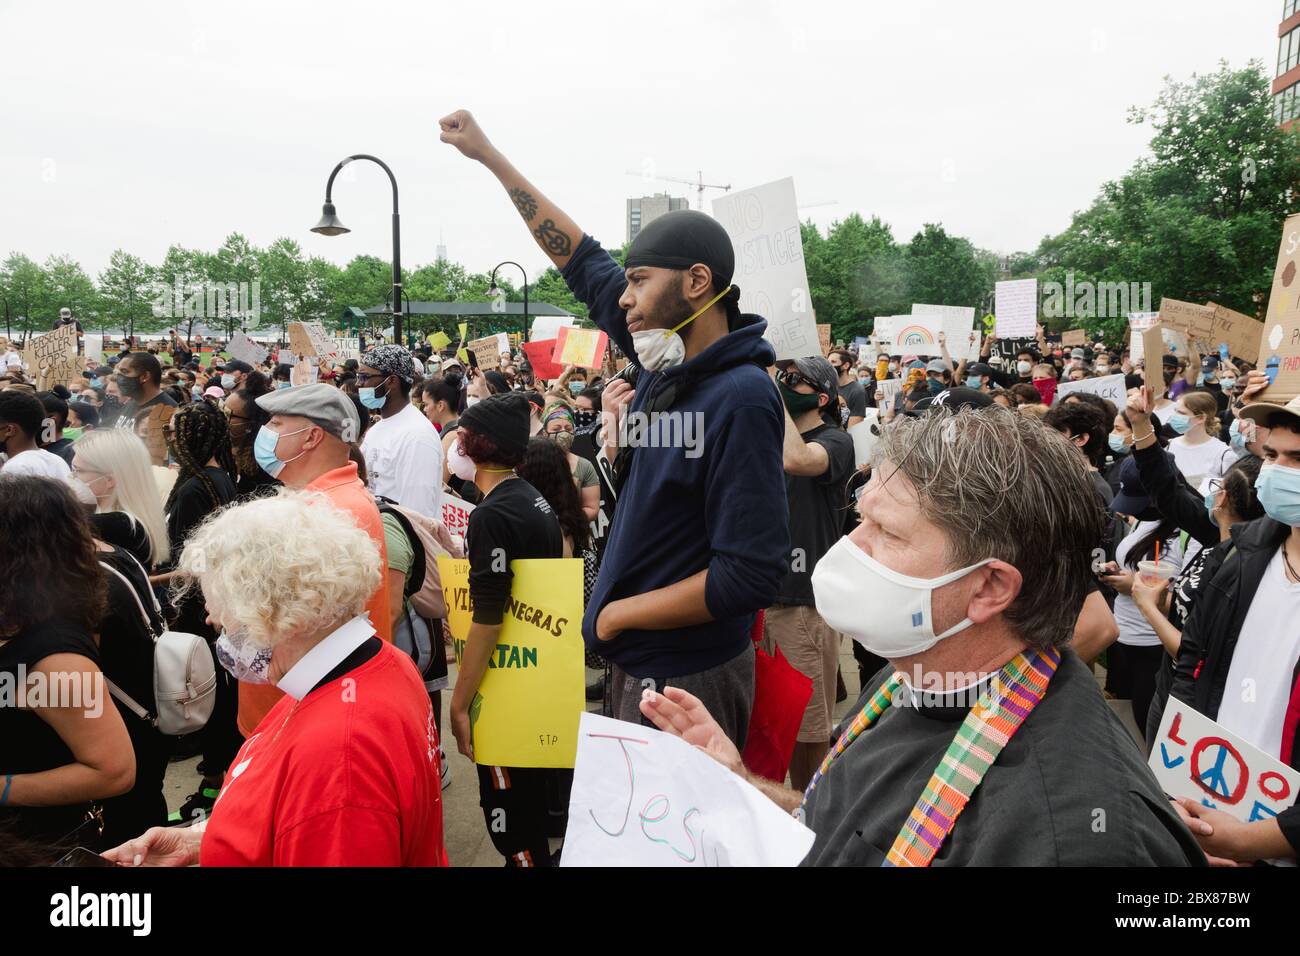 Hoboken, NJ / USA - June 5th, 2020: Black Lives Matter Peaceful Protest in Hoboken, New Jersey to advocate against anti-racism, police brutality and f Stock Photo